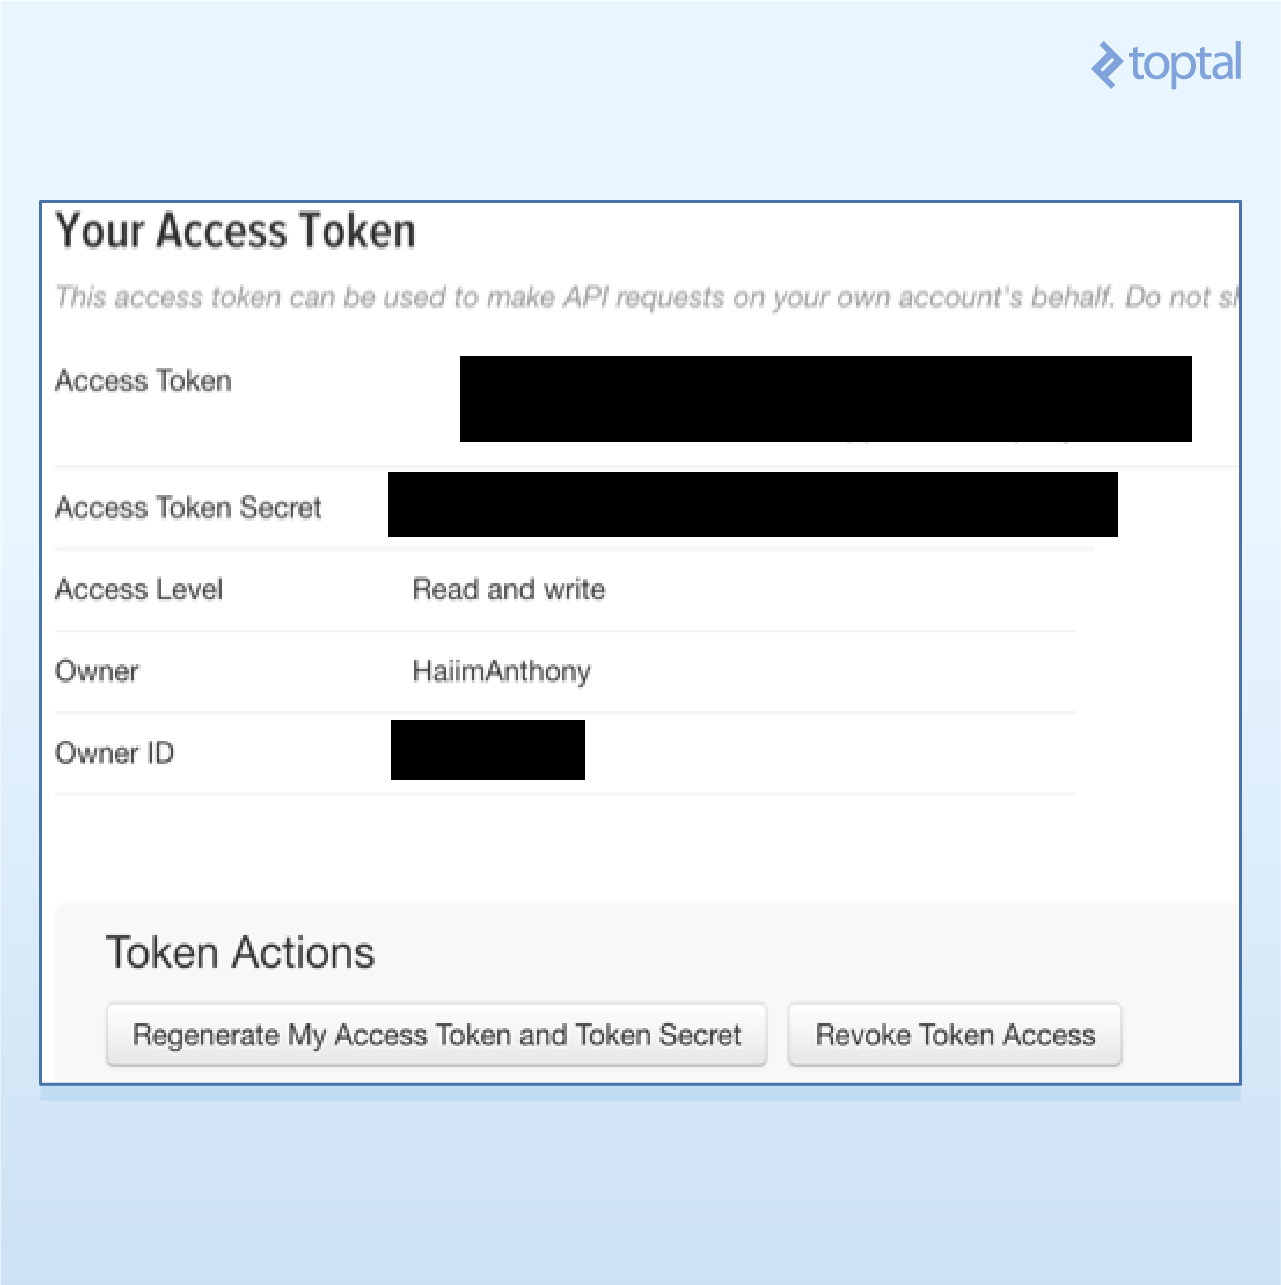 Form showing access tokens